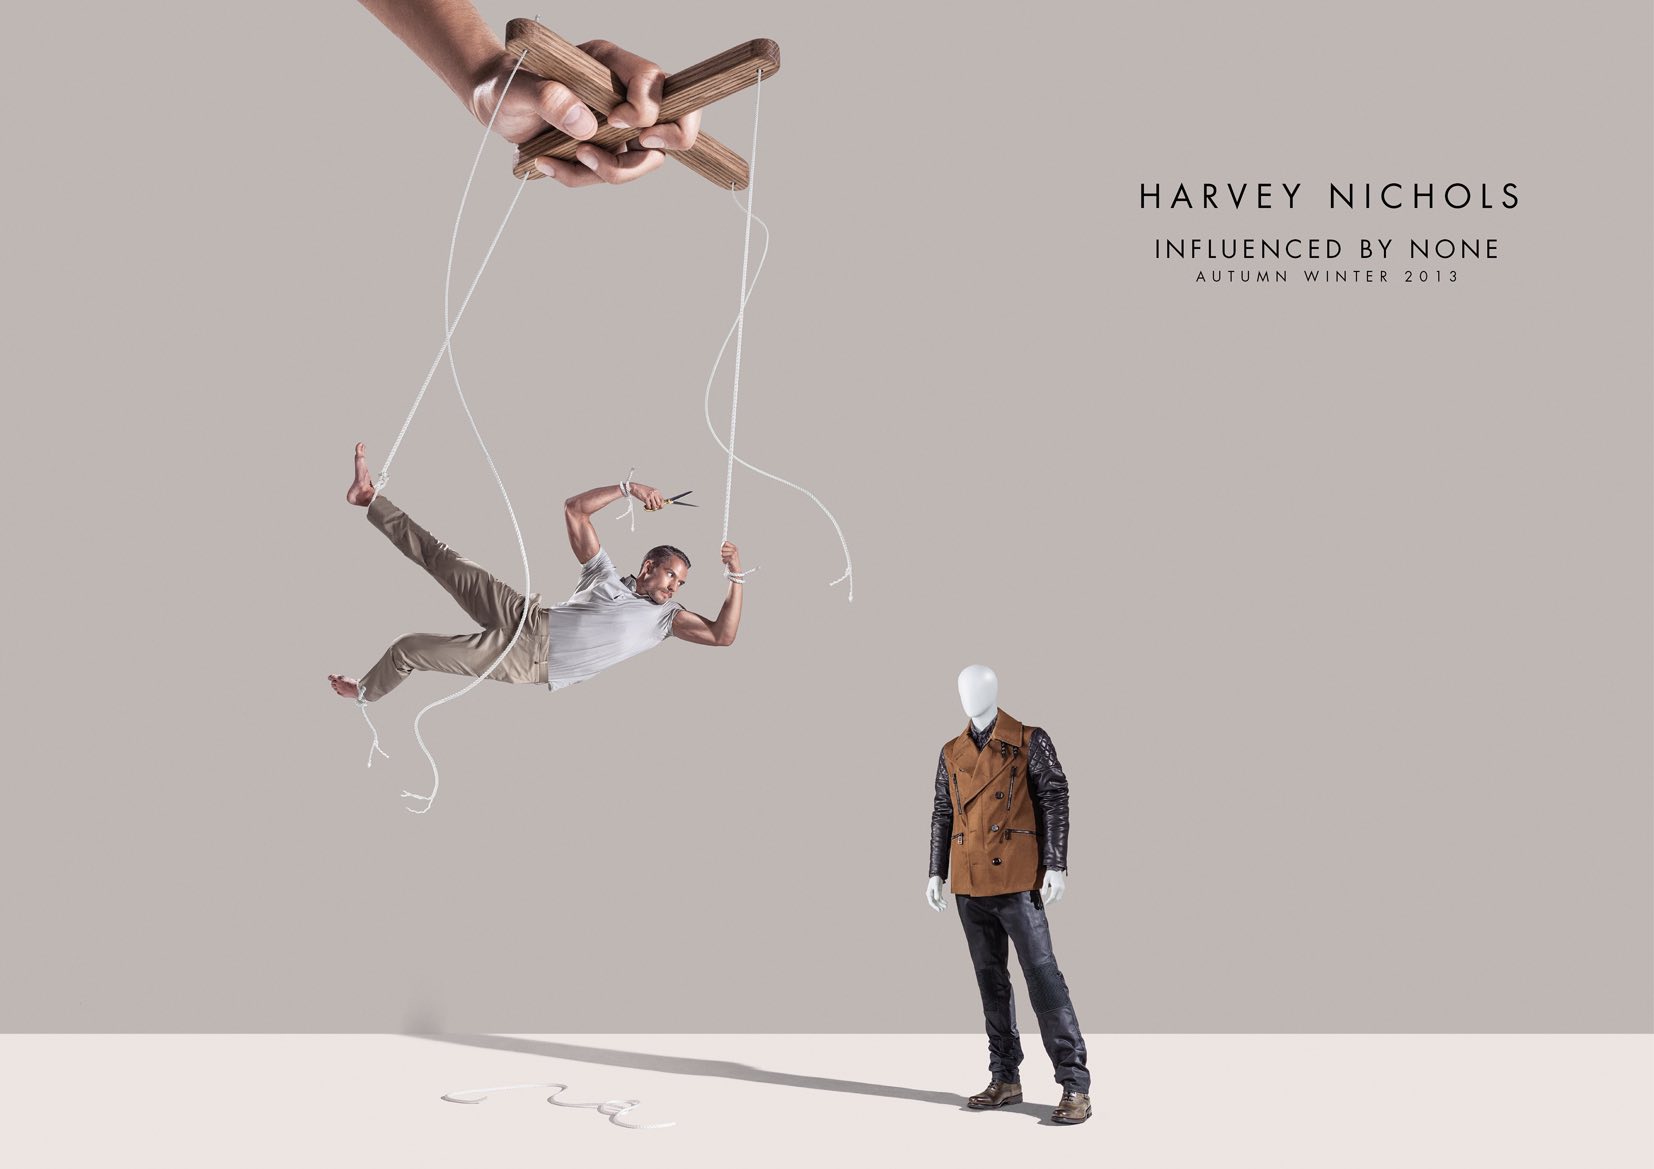 Harvey_Nichols_Influenced_by_None_ad _campaign_2_cotw